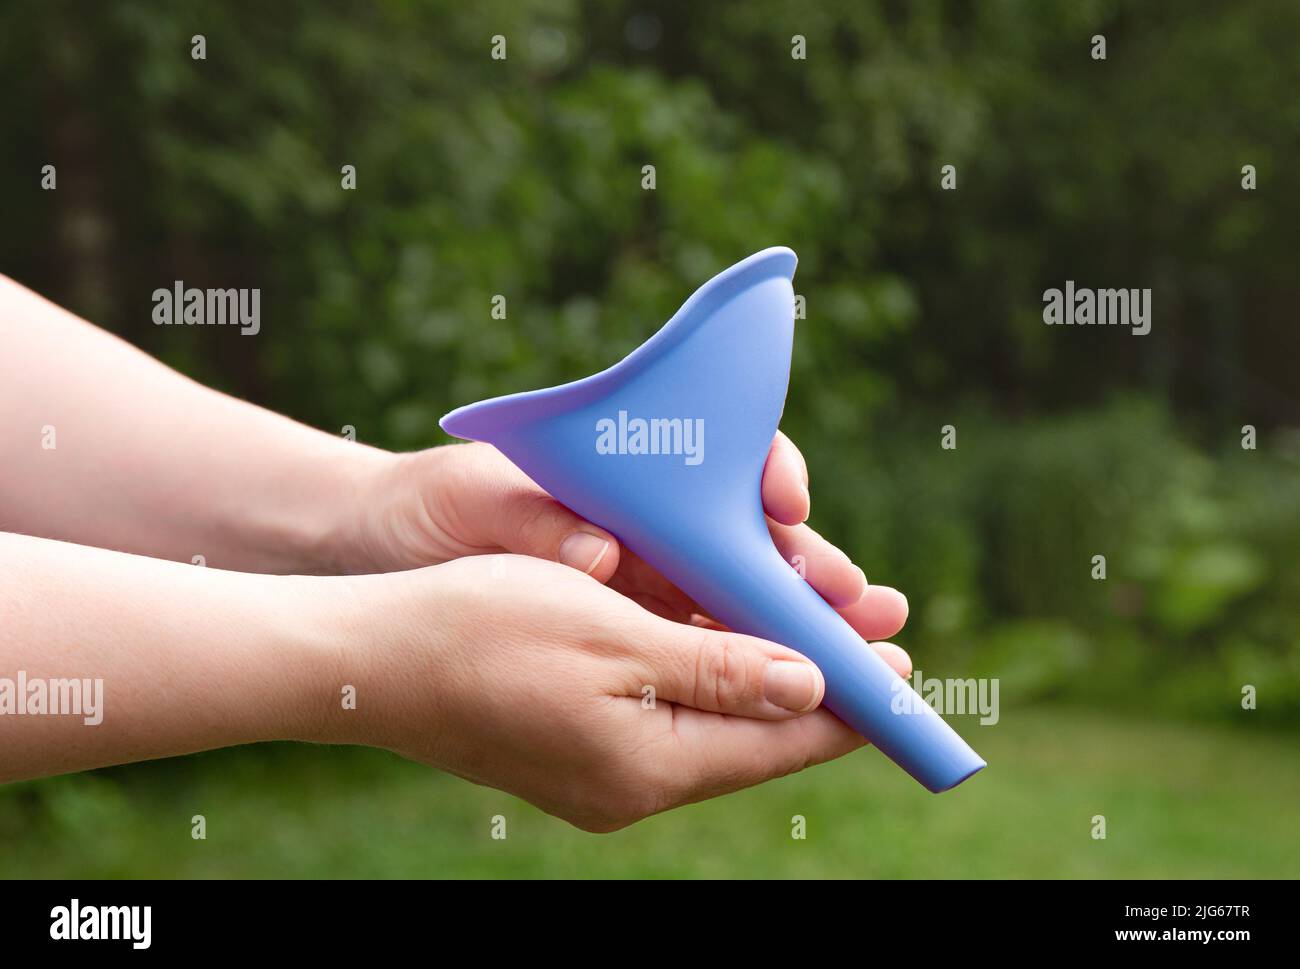 Device for women, pee funnel, to use while camping outdoors, helps urinating standing. Woman hands holding the tool. Stock Photo